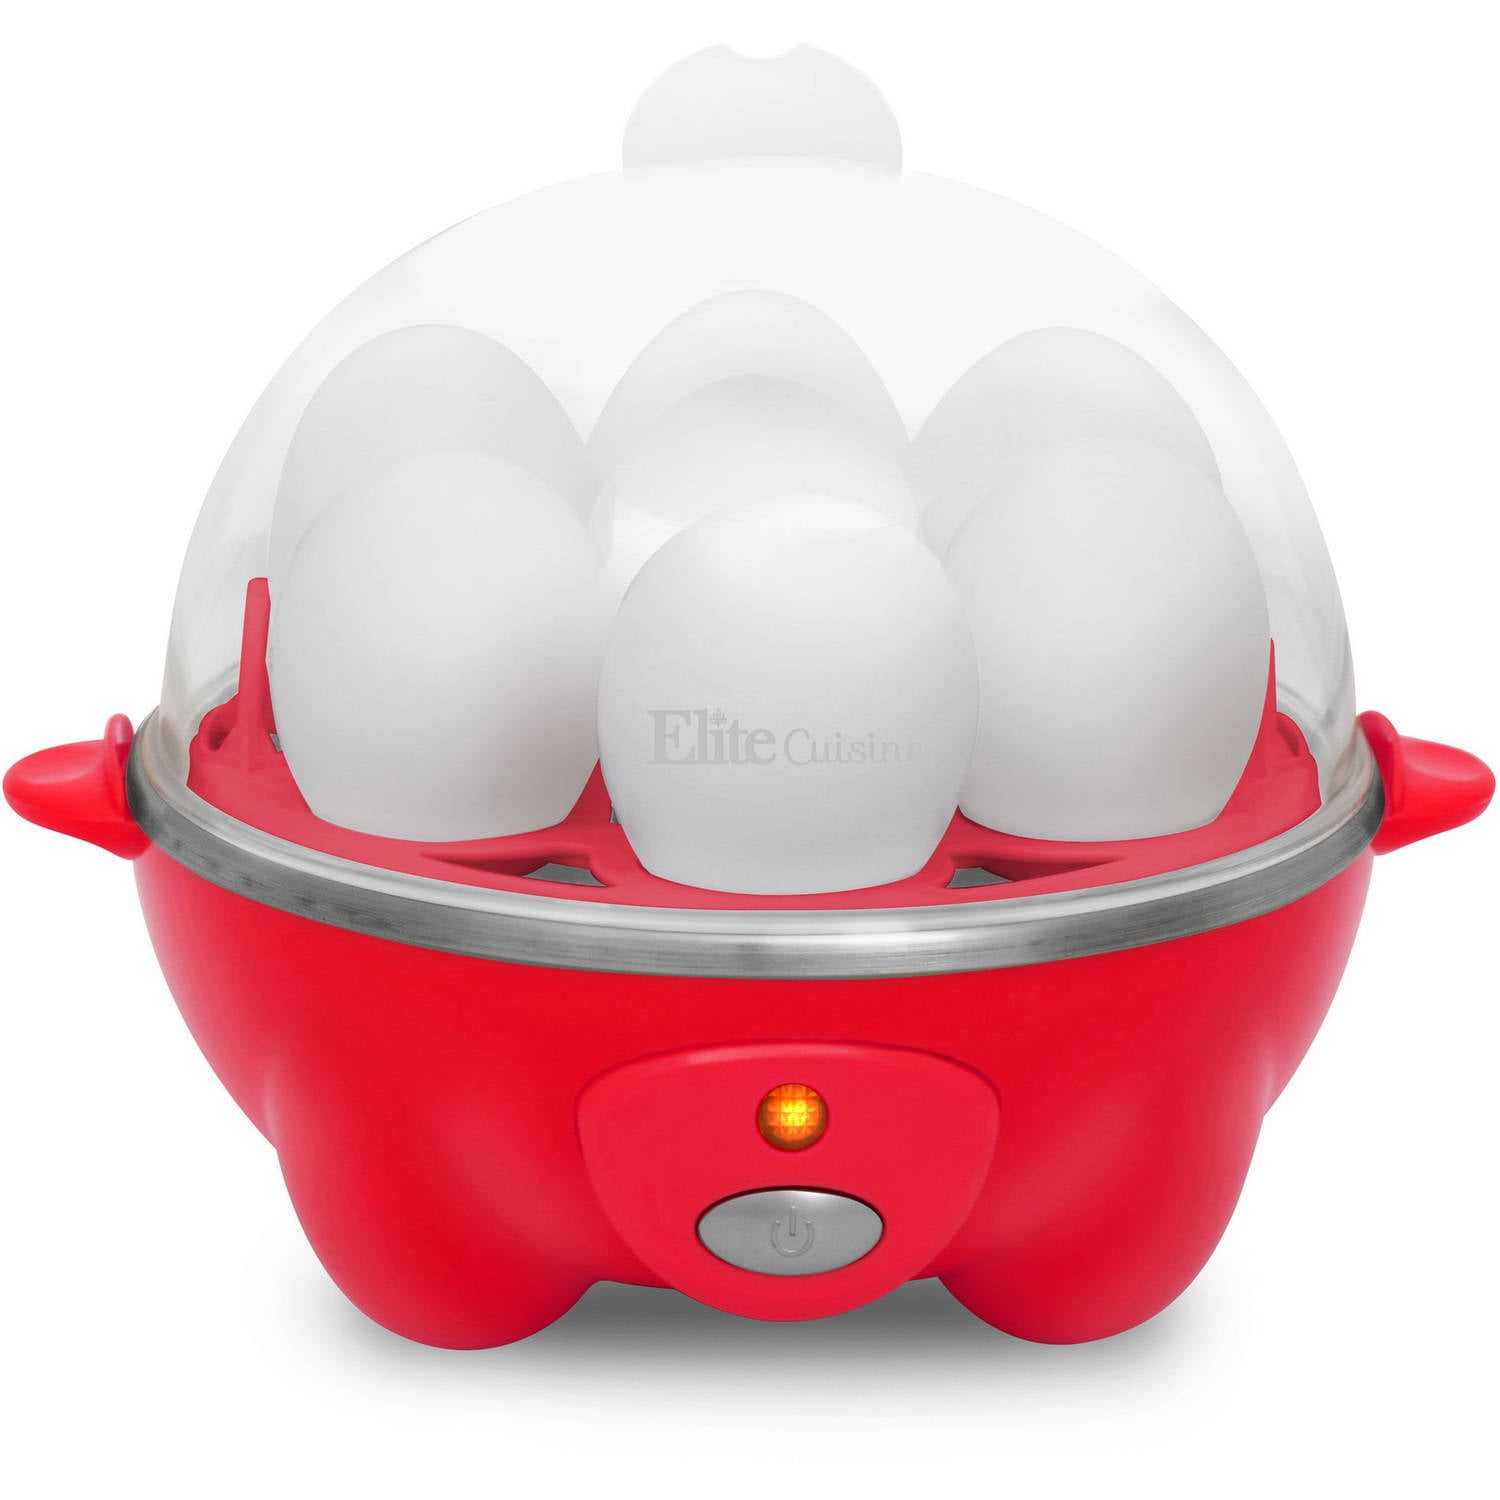 Elite Gourmet 7-Eggs White Easy Egg Cooker with Poaching Tray EGC007CW -  The Home Depot